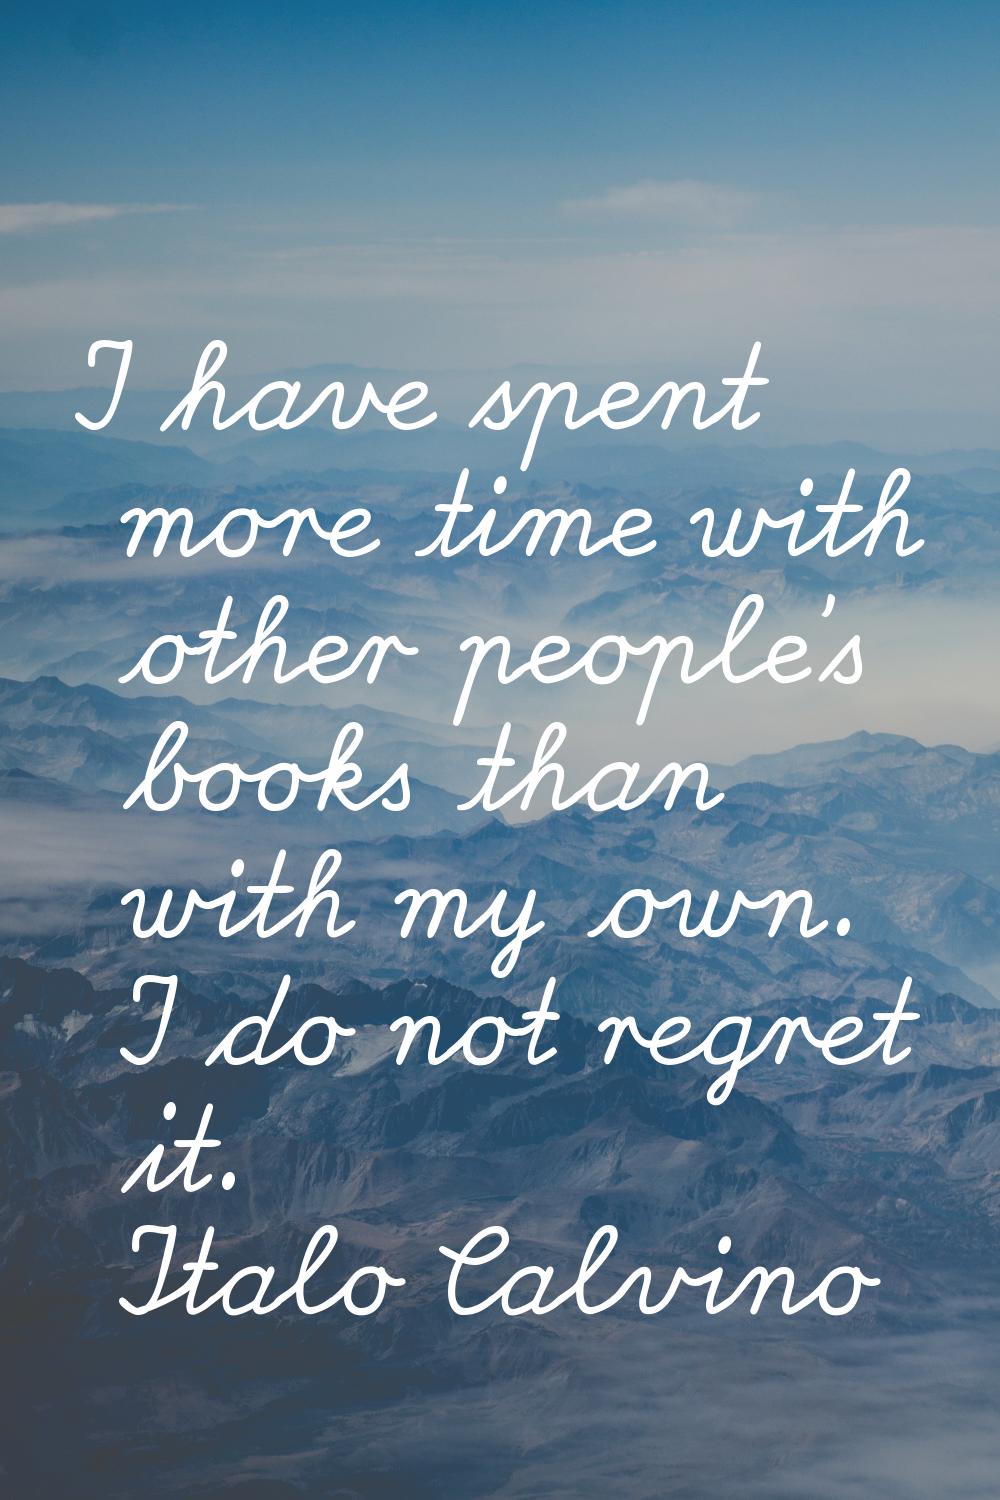 I have spent more time with other people's books than with my own. I do not regret it.